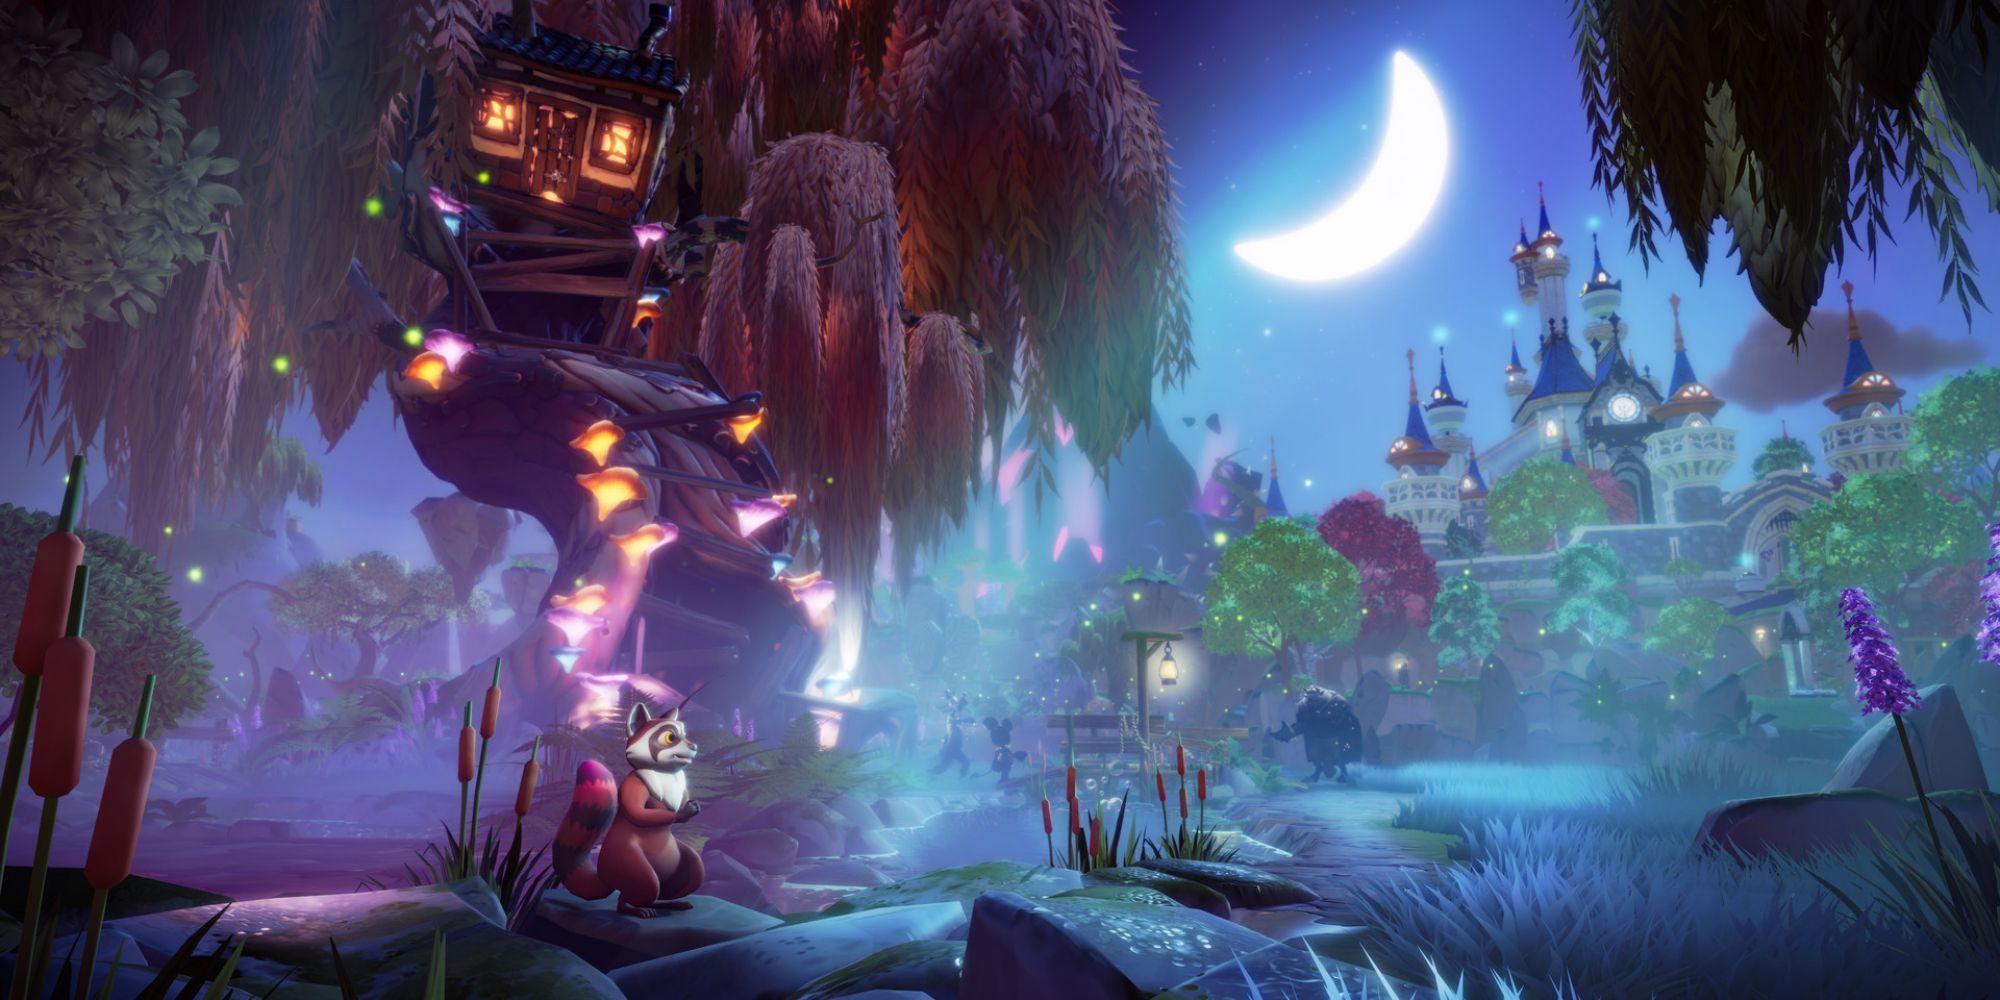 An enchanted forest in Disney Dreamlight Valley